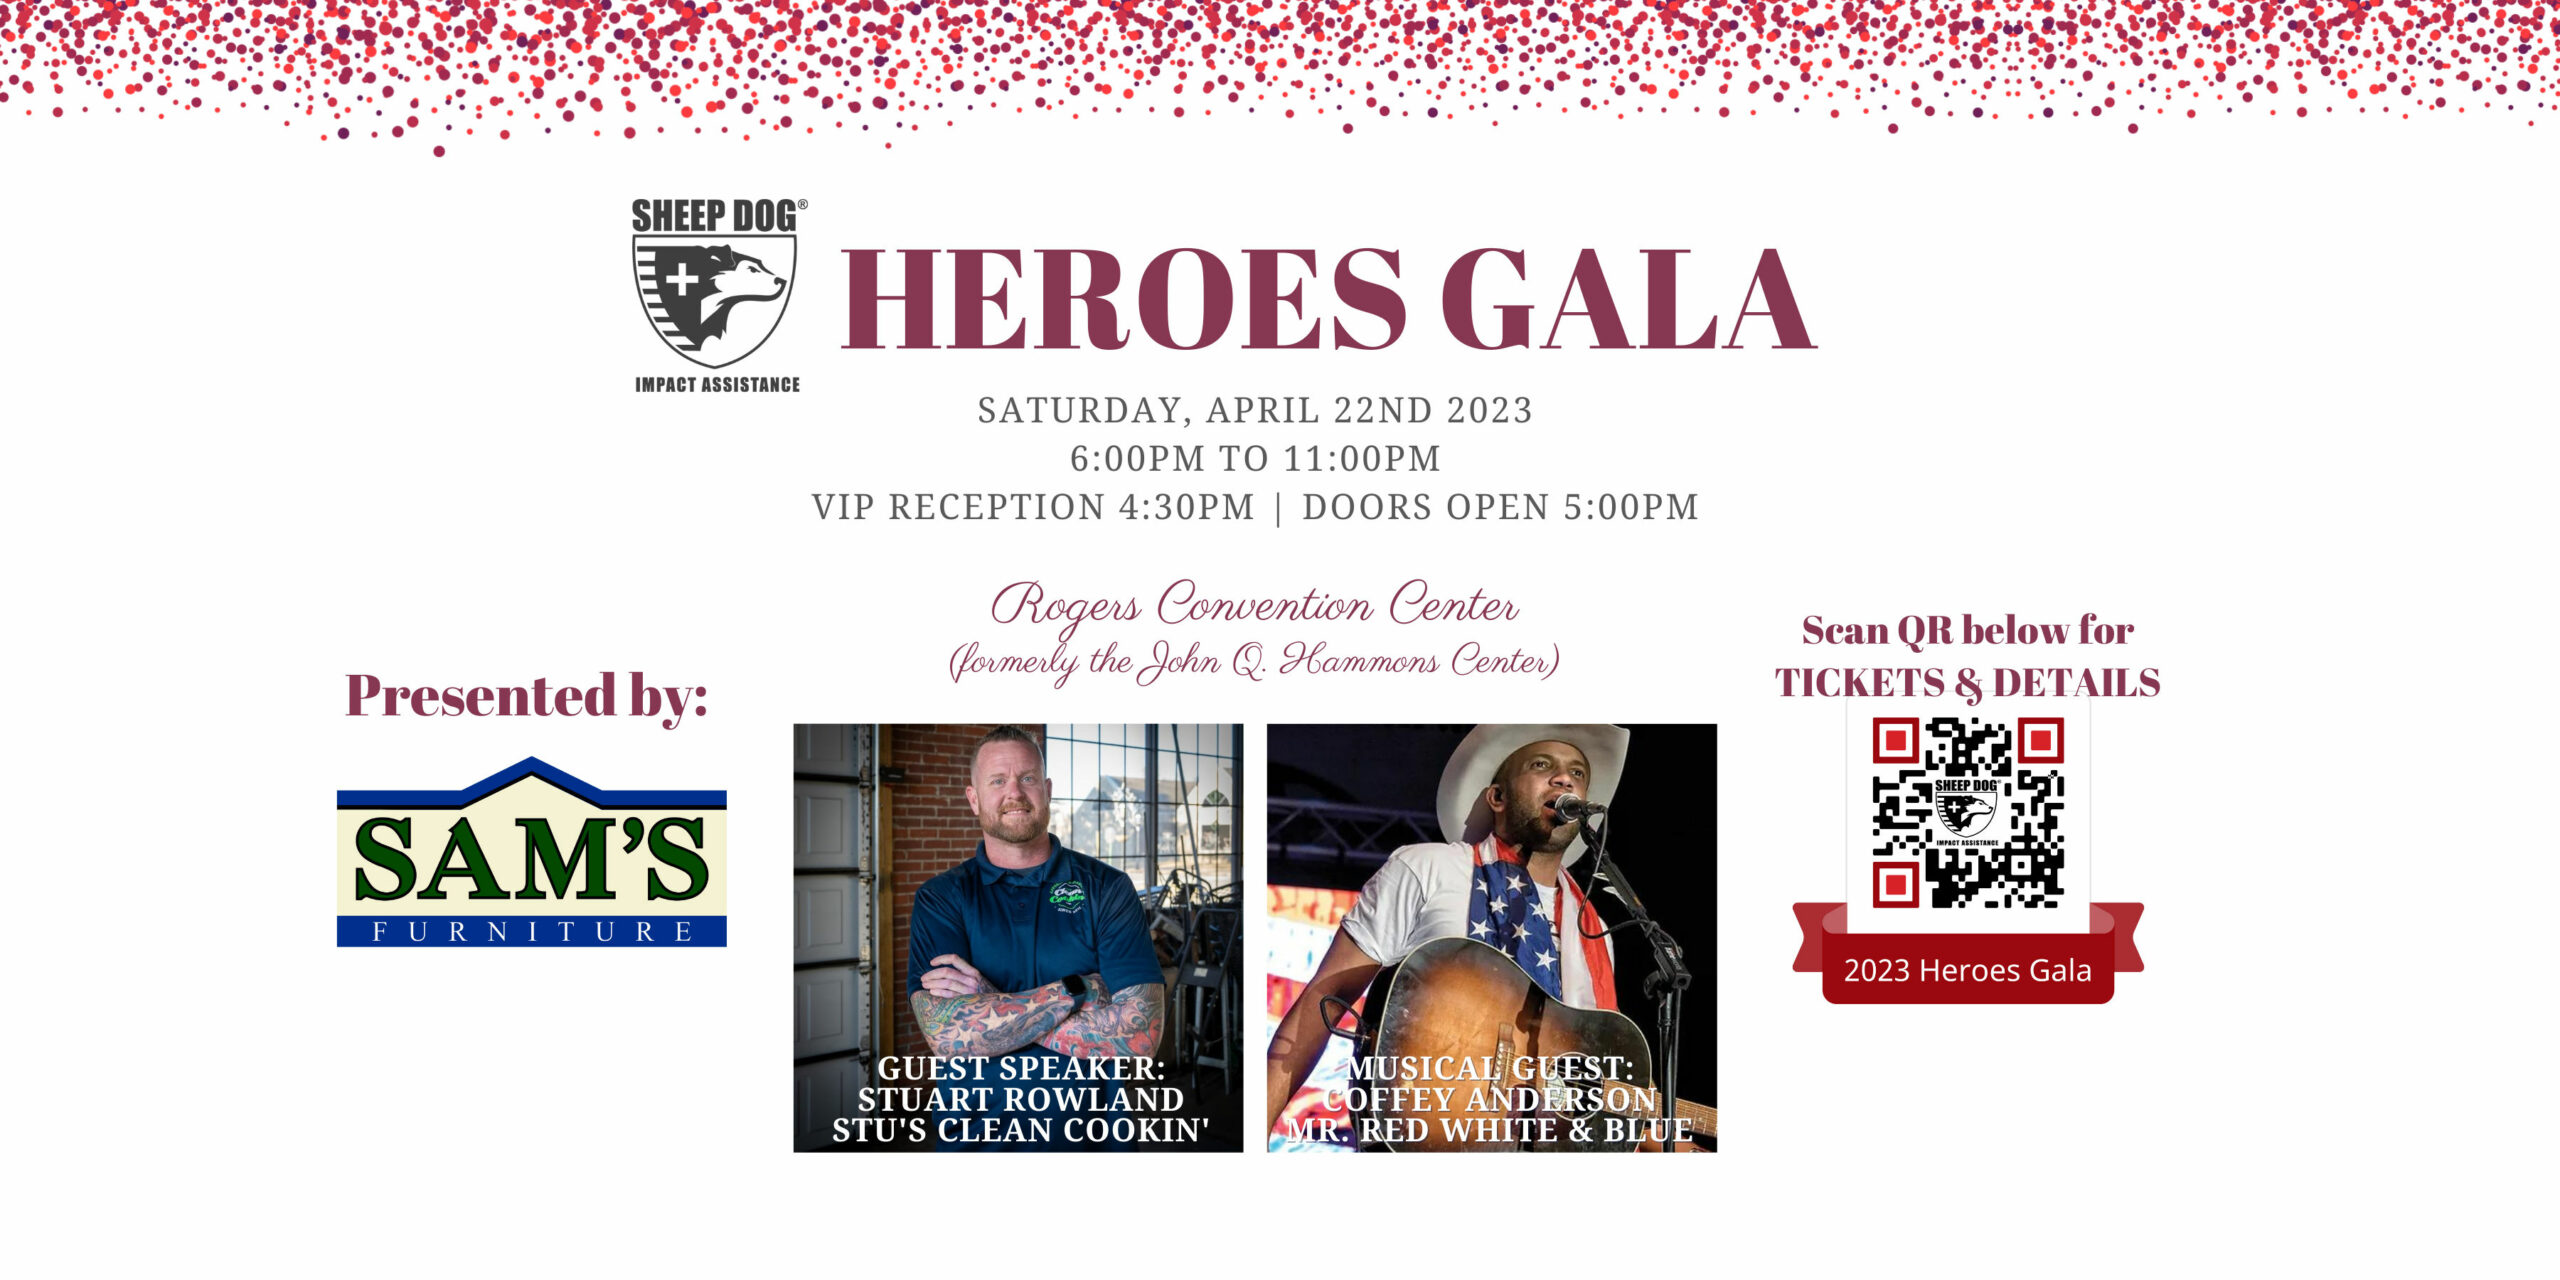 SDIA’s HEROES GALA IS BACK ON APRIL 22